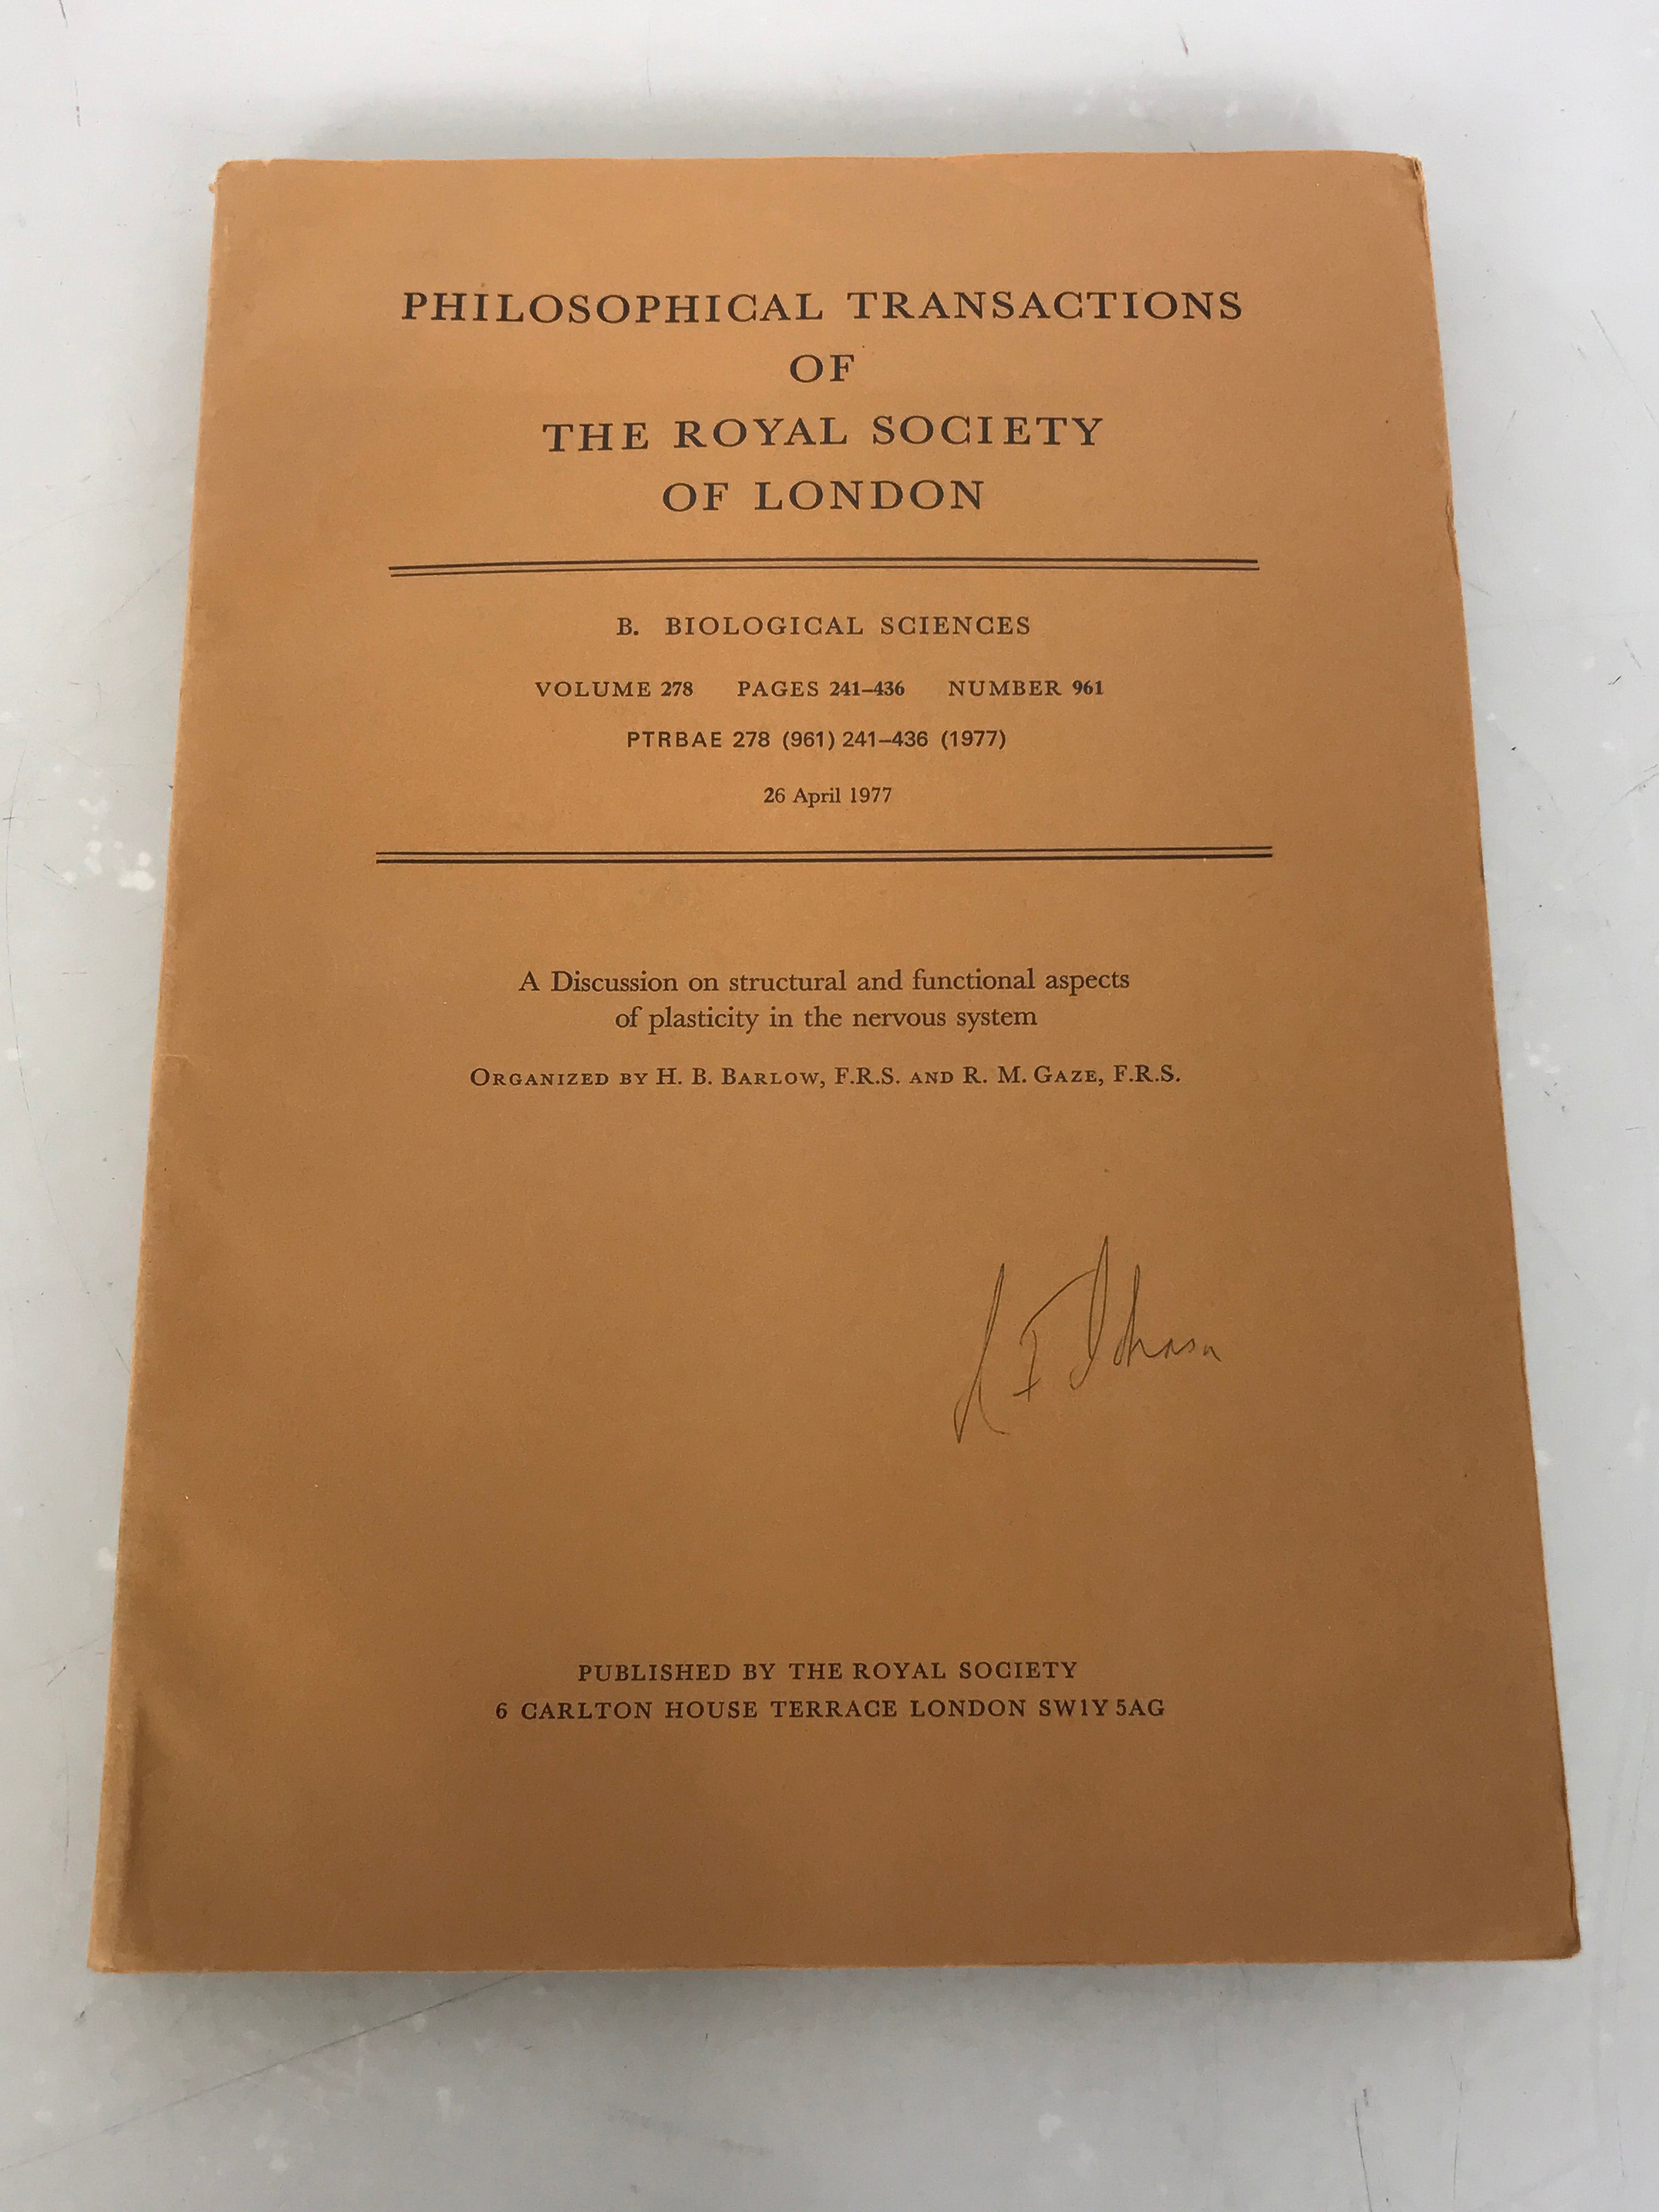 A Discussion on structural and functional aspects of plasticity: Philosophical Transactions of the Royal Society of London Vol 278 Biological Sciences April 1977 SC